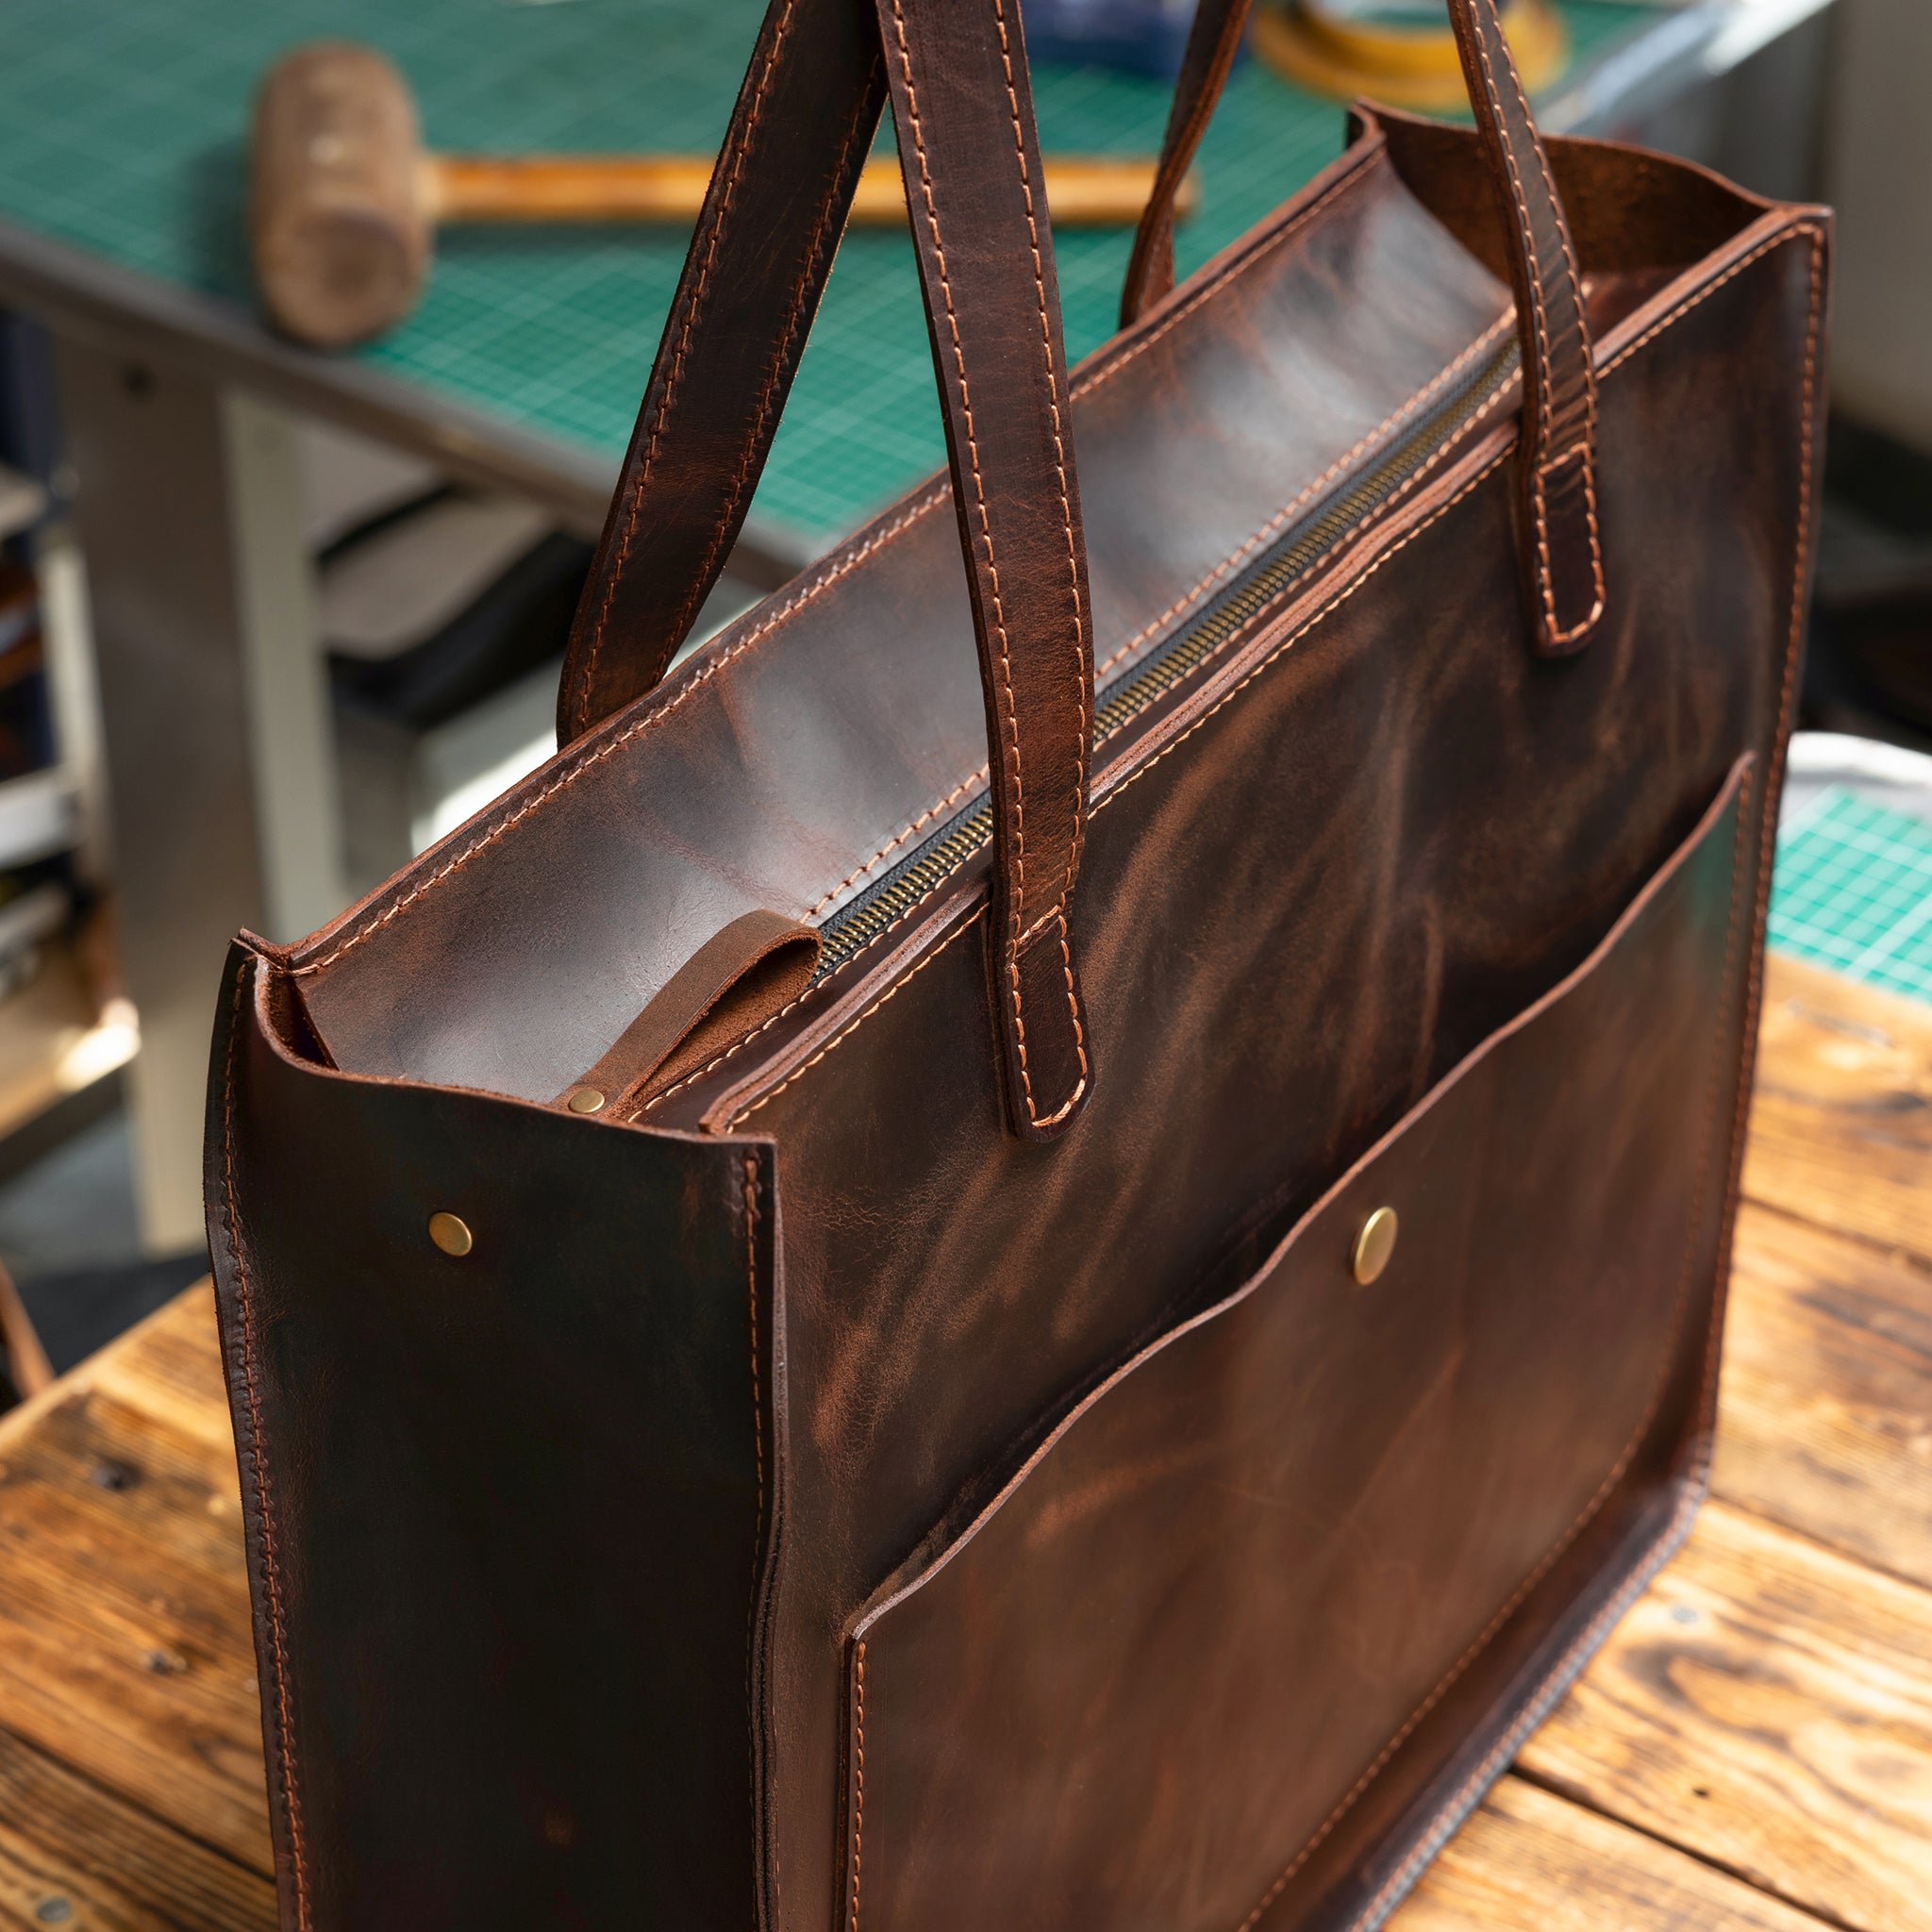 Handmade Leather Tote Laptop Bag For Women 13"and 14 inch. Laptops  - Western